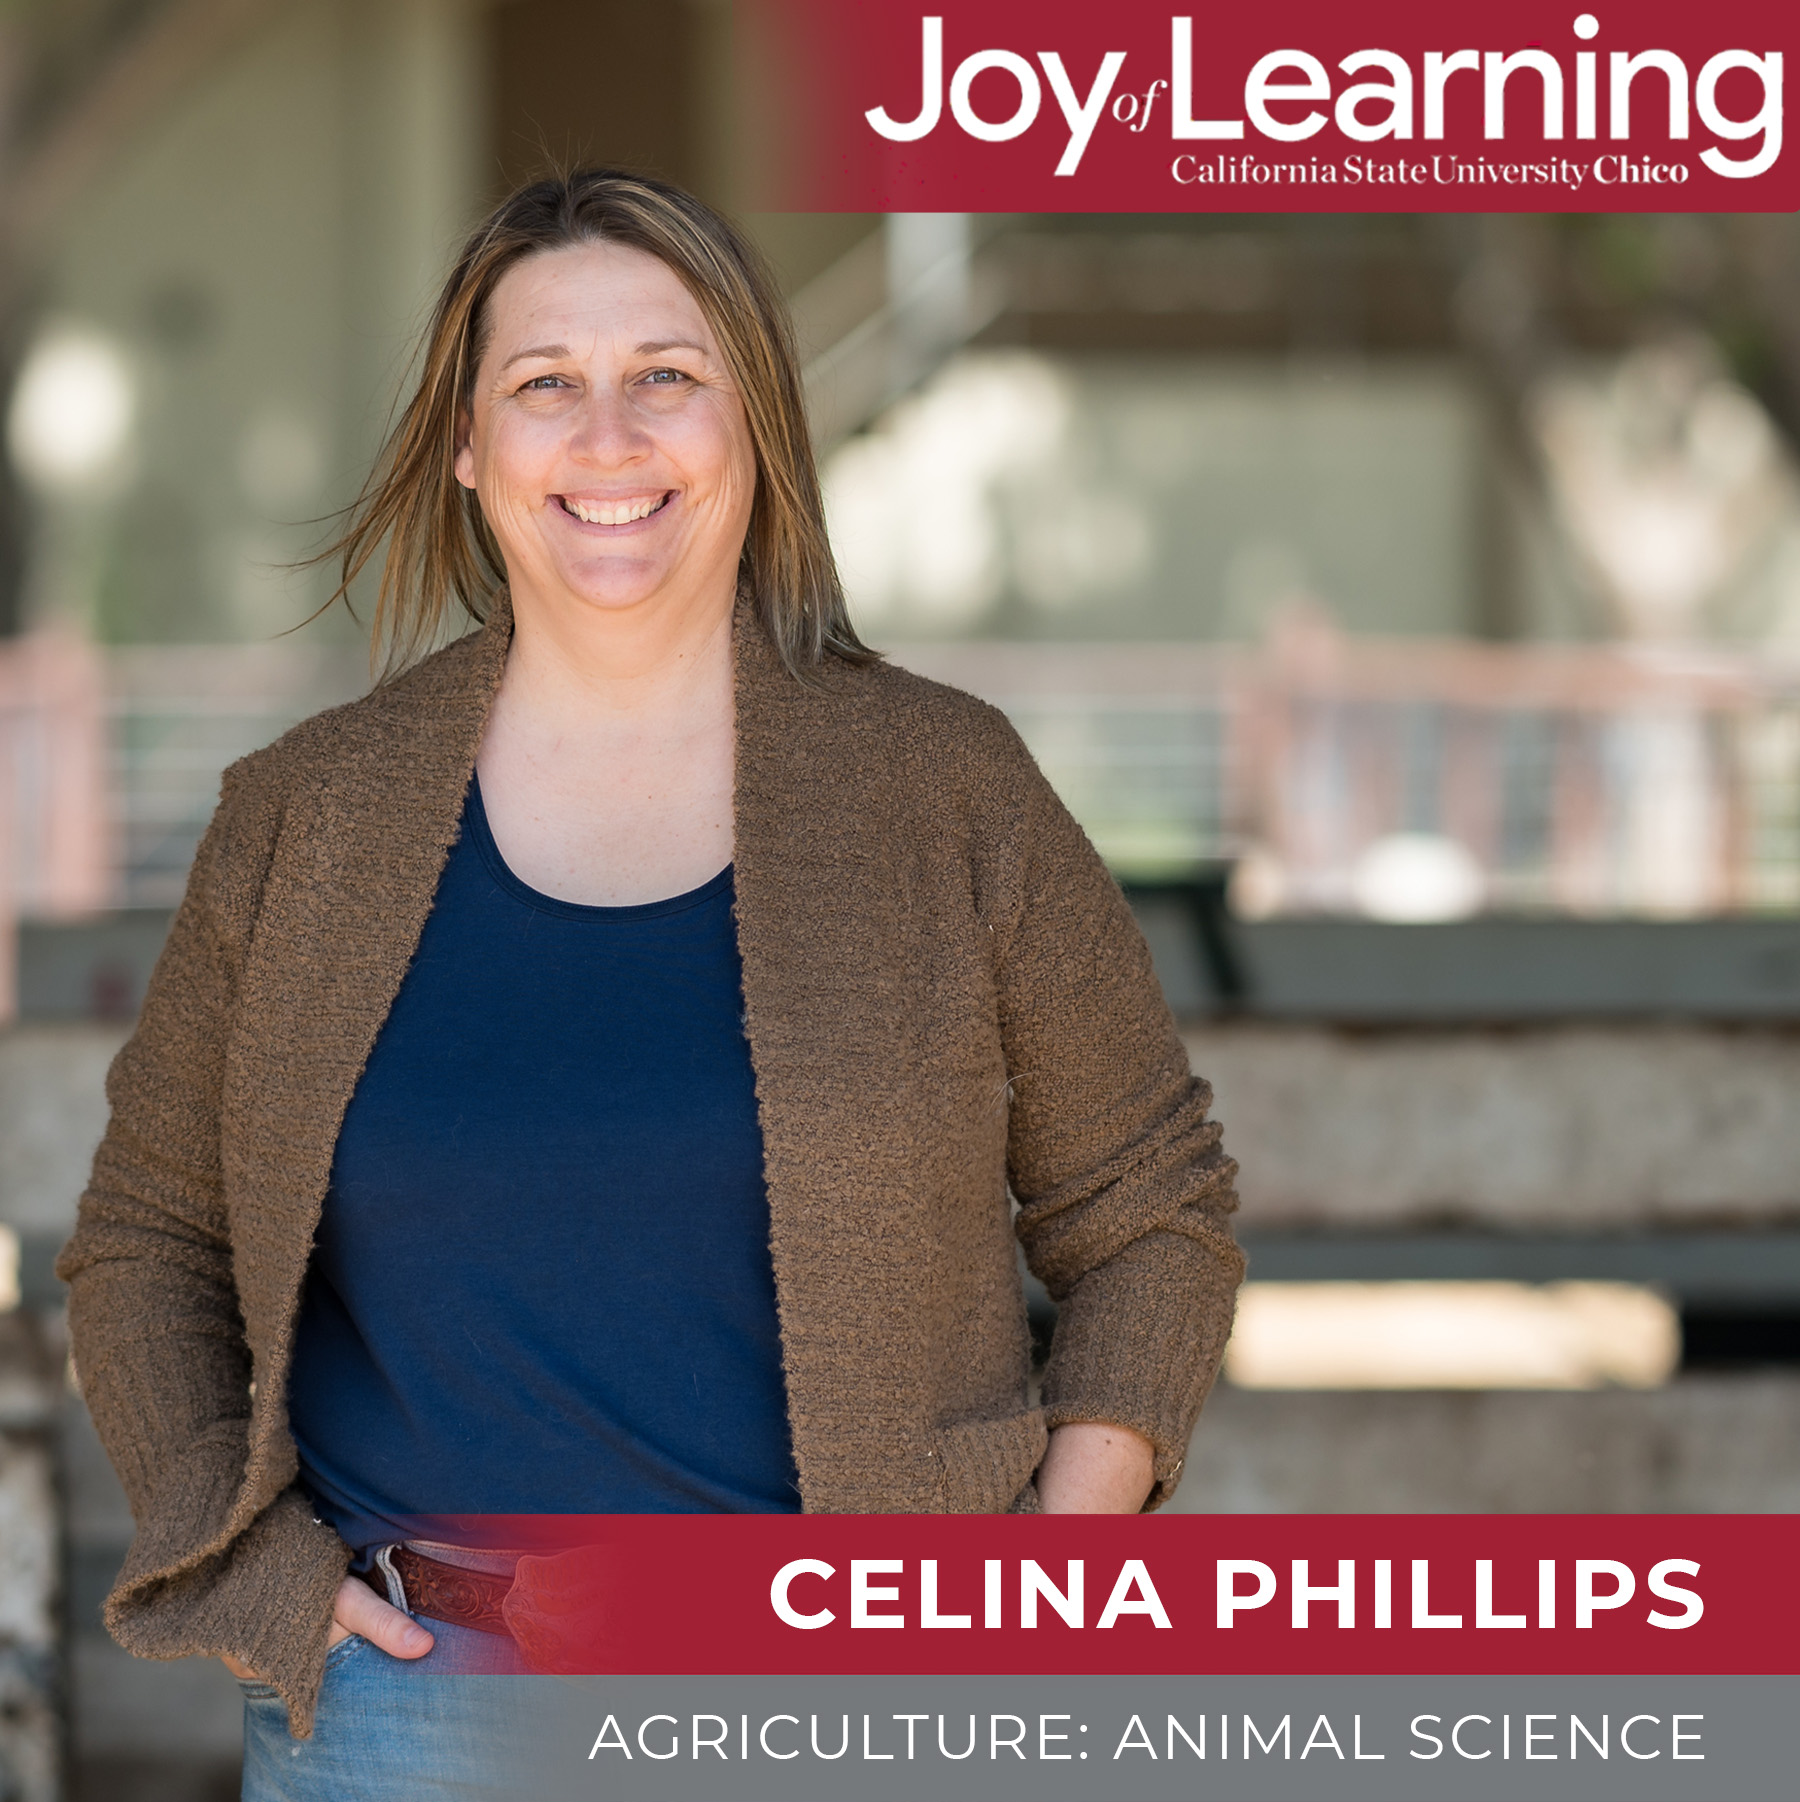 Joy of Learning Celina Phillips College of Agriculture